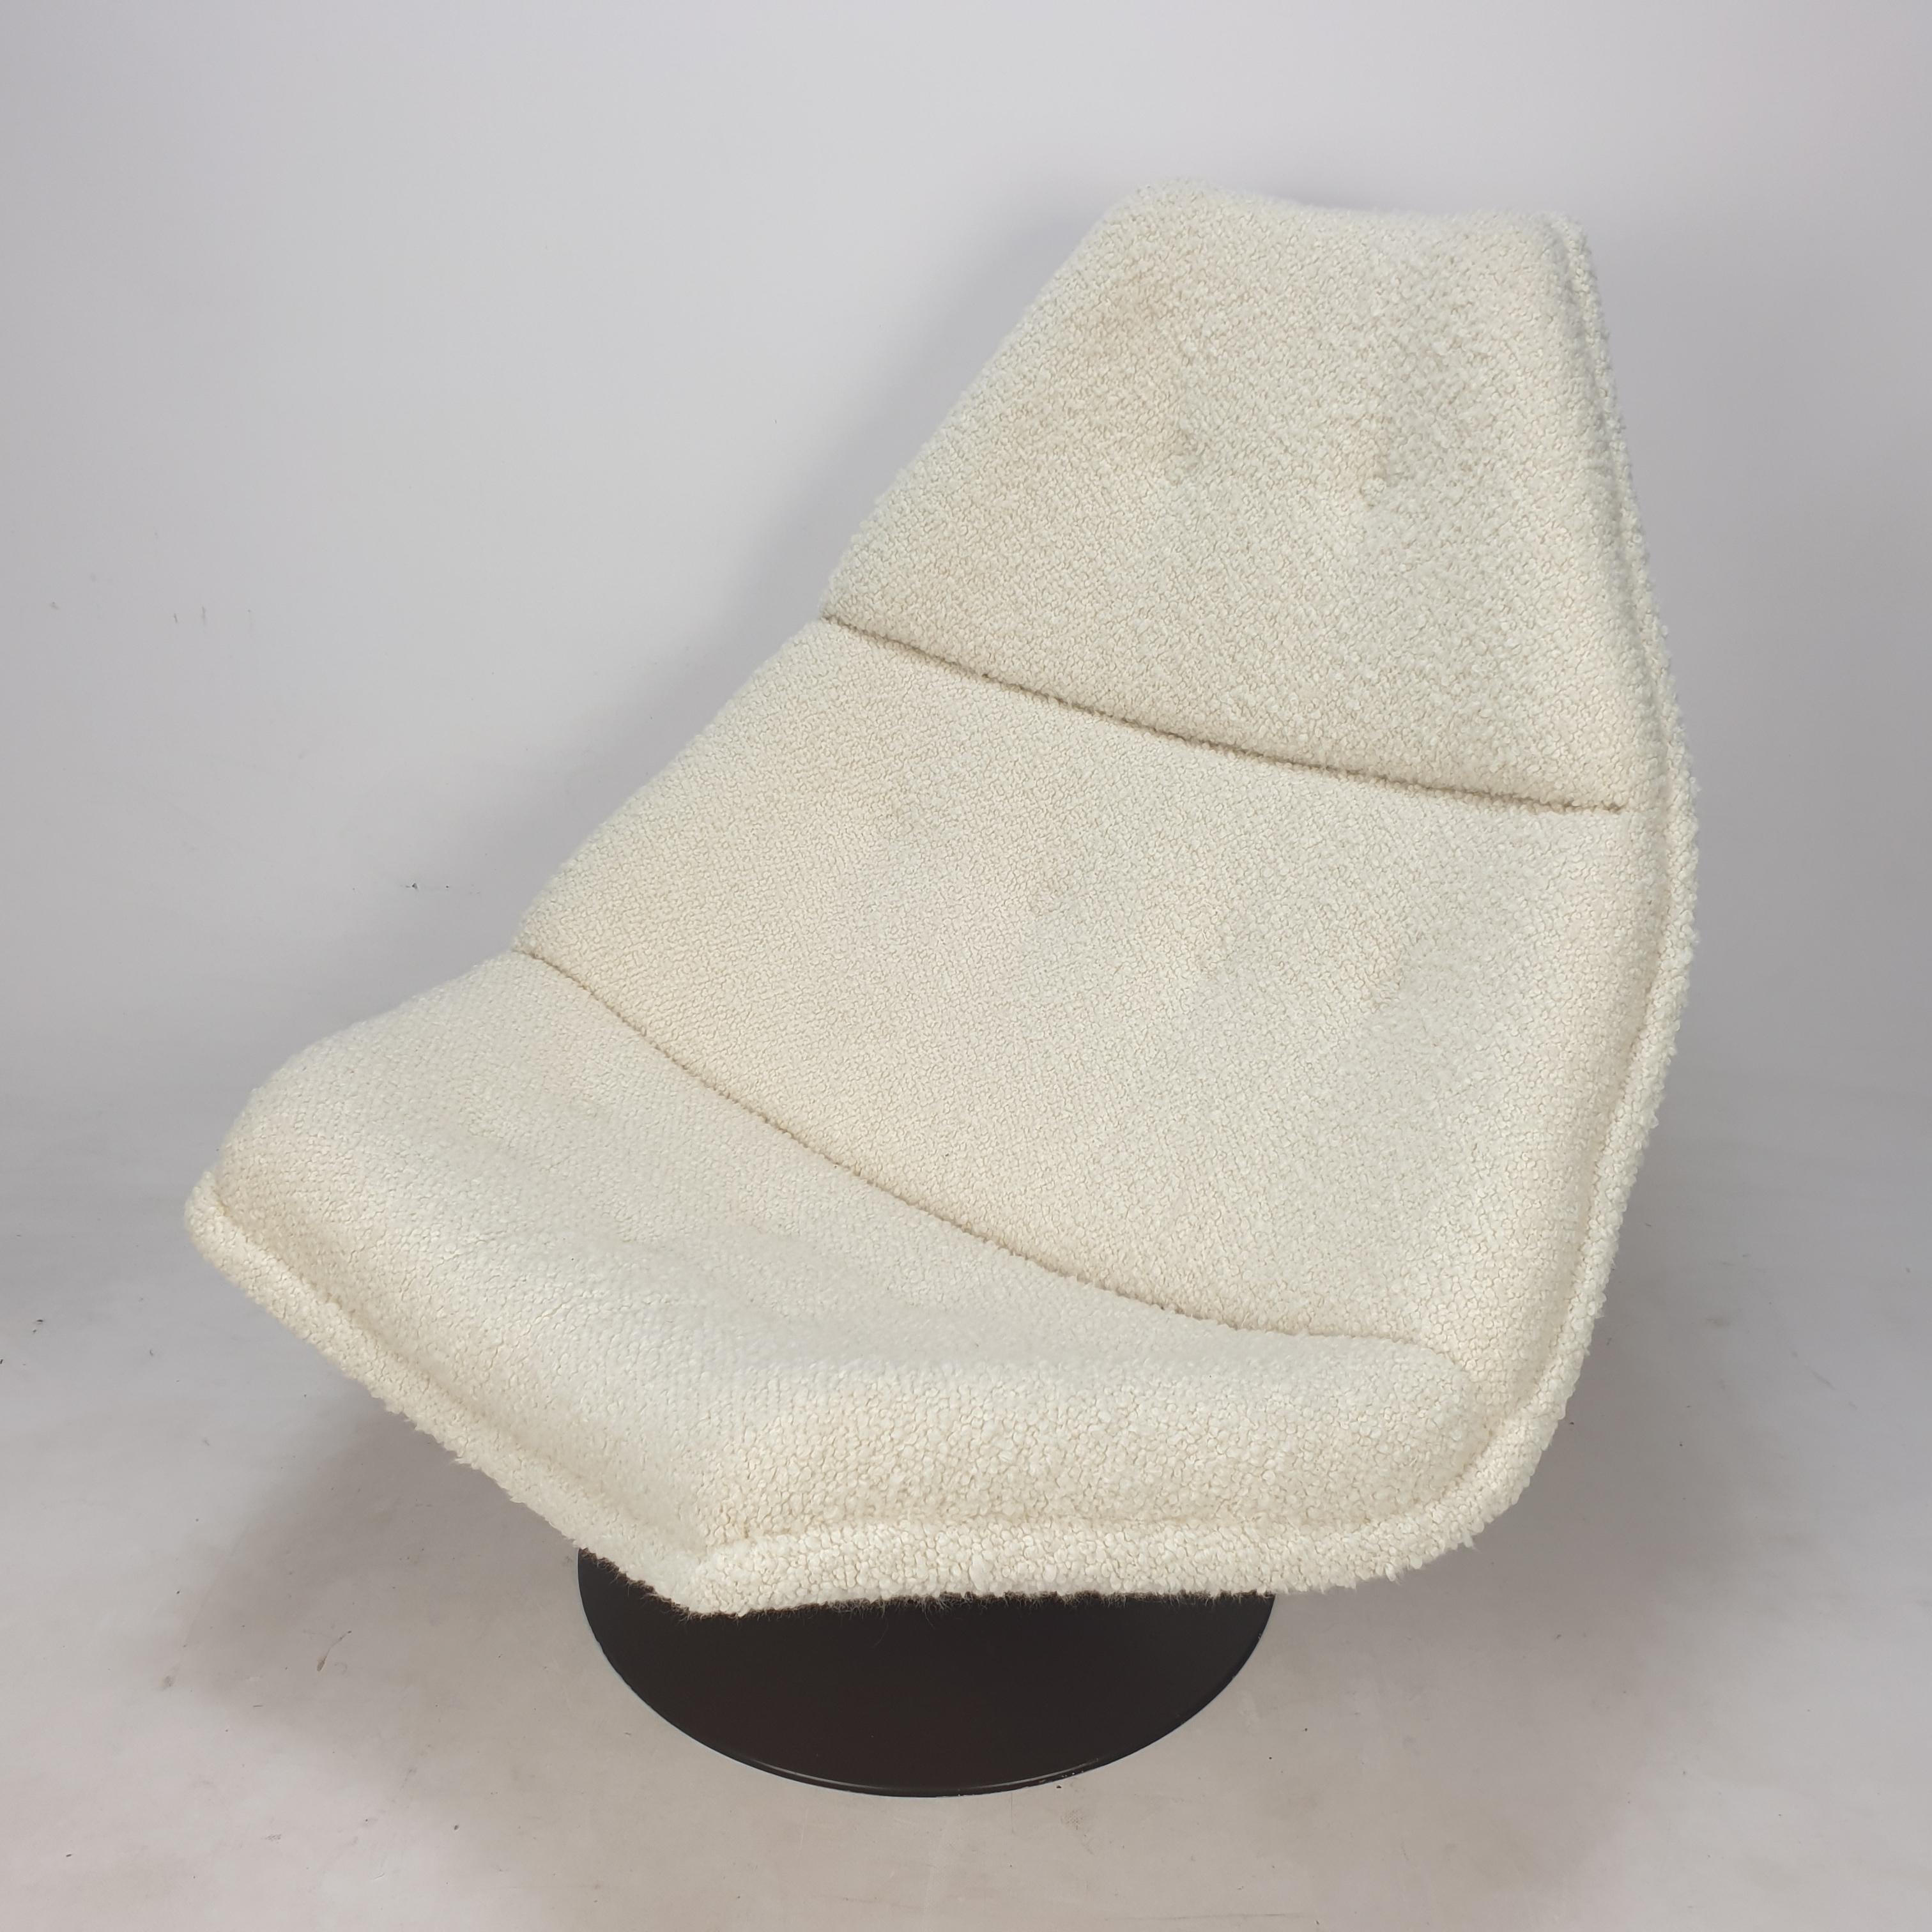 Very comfortable Artifort lounge chair. 
Designed by the famous English designer Geoffrey Harcourt in the 60's. 

The chair is just restored with new fabric and new foam.
It is reupholstered with very soft Italian bouclé fabric.
It has the